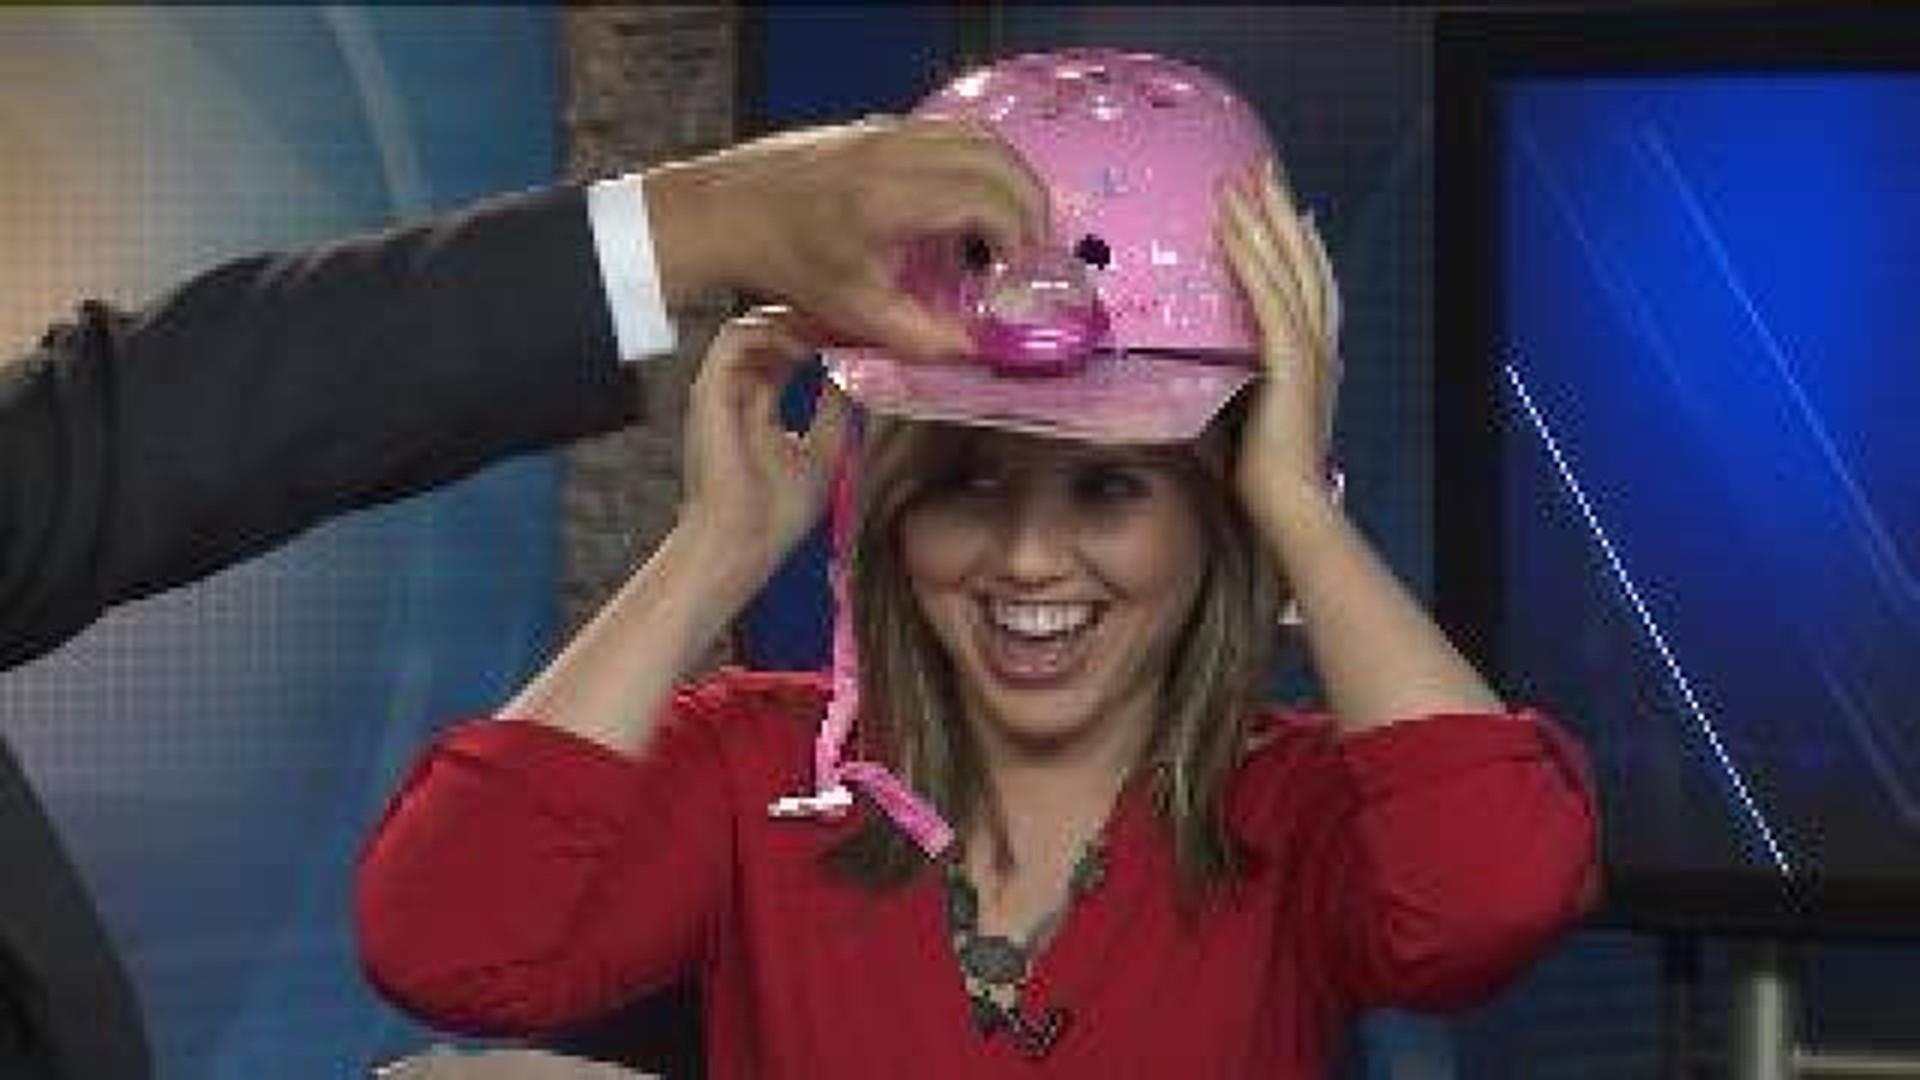 News 8 at 11: More Cassie Gifts